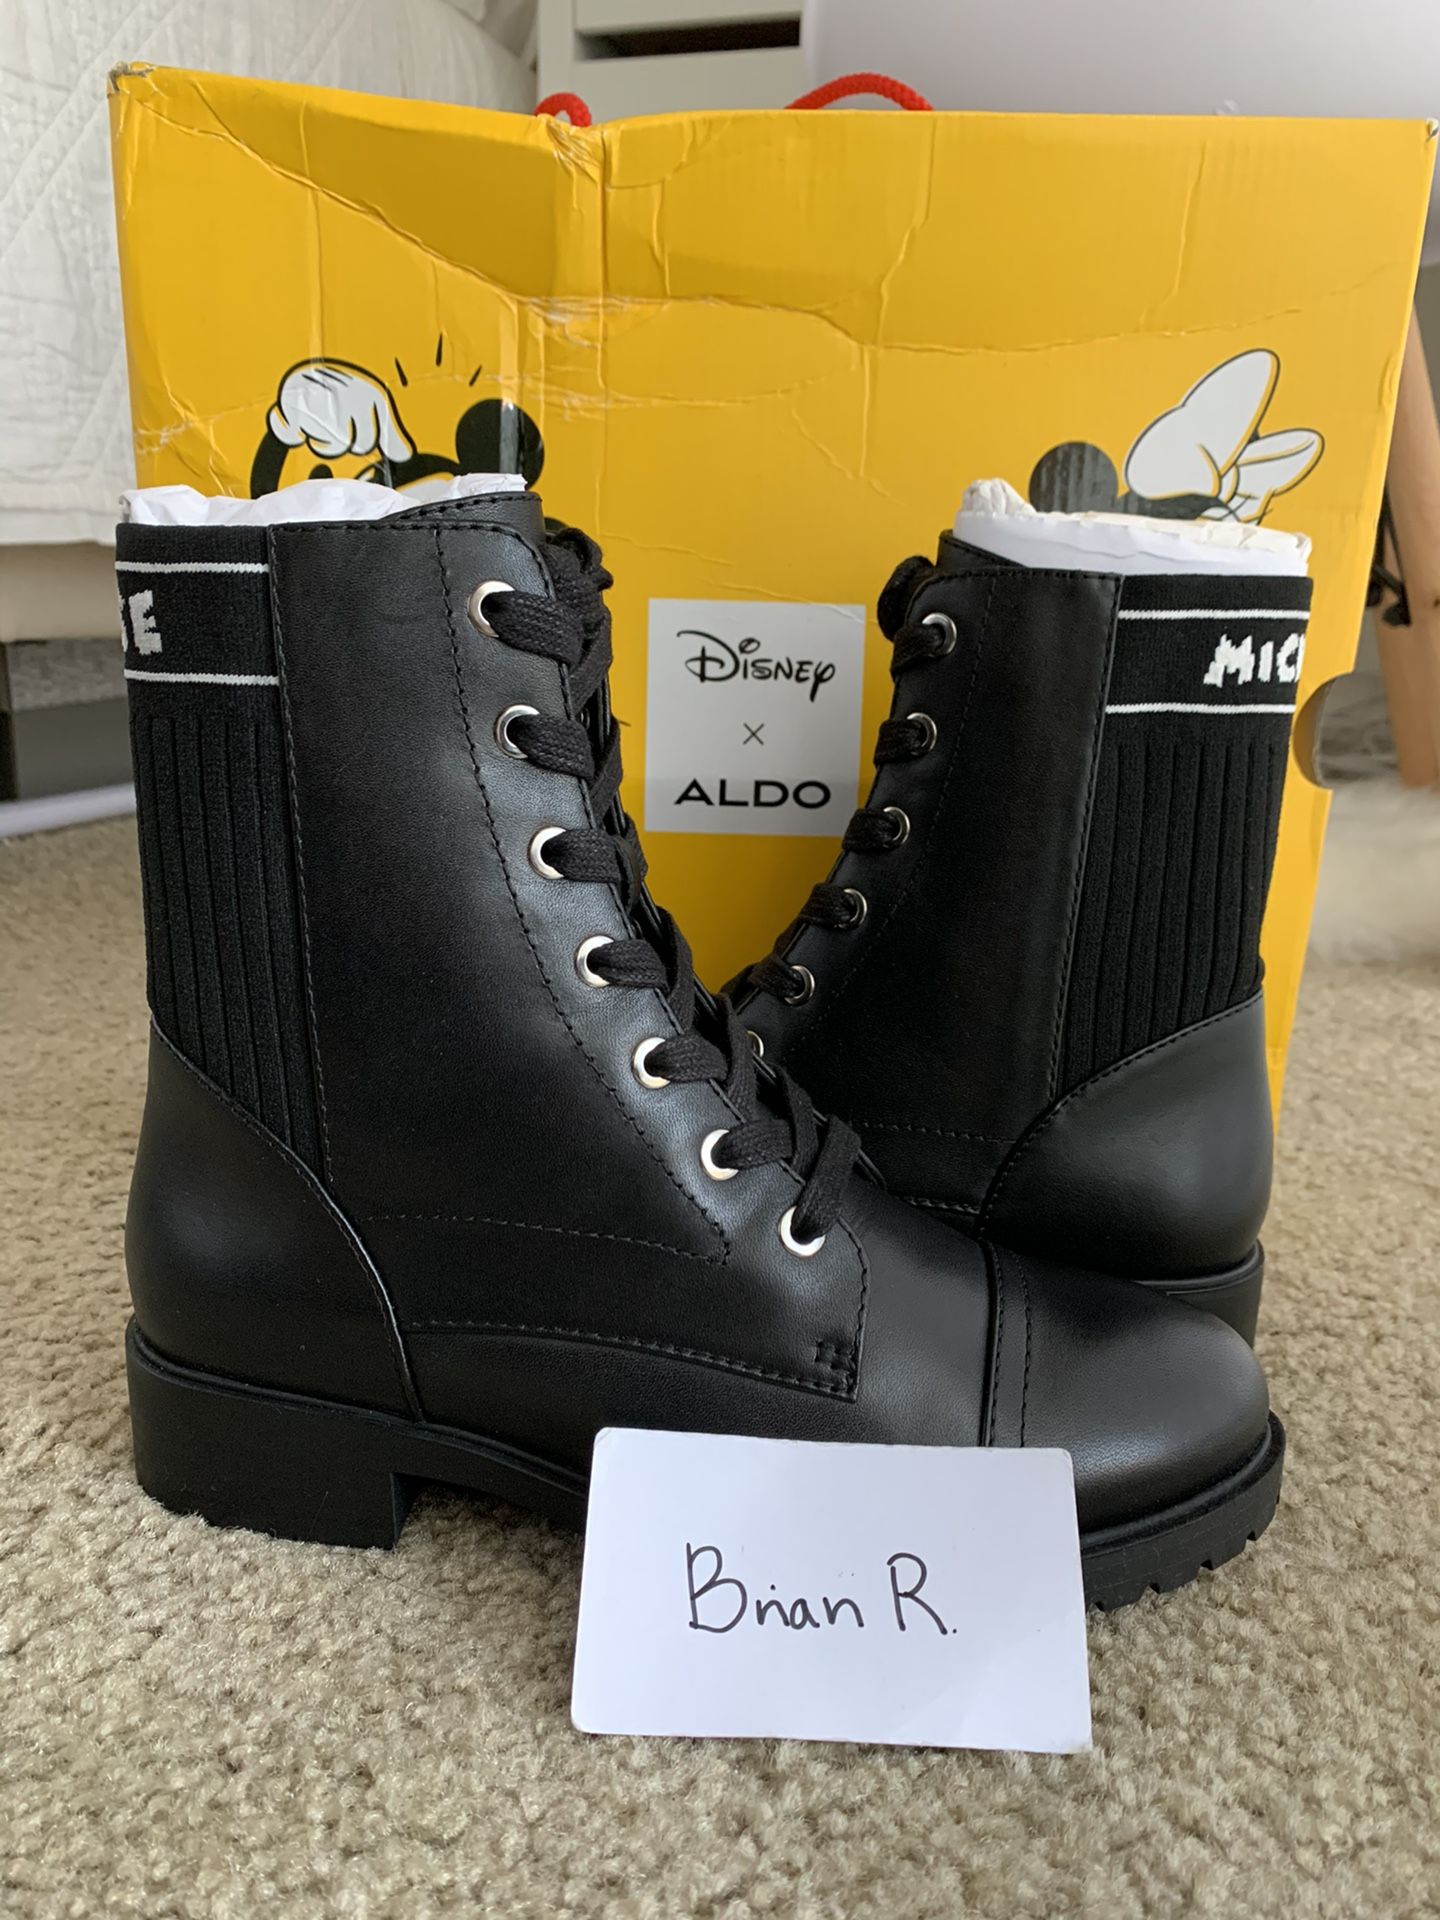 Disney x Aldos Collab Boots Ankle Boot Ohsomickey Size 6 brand new